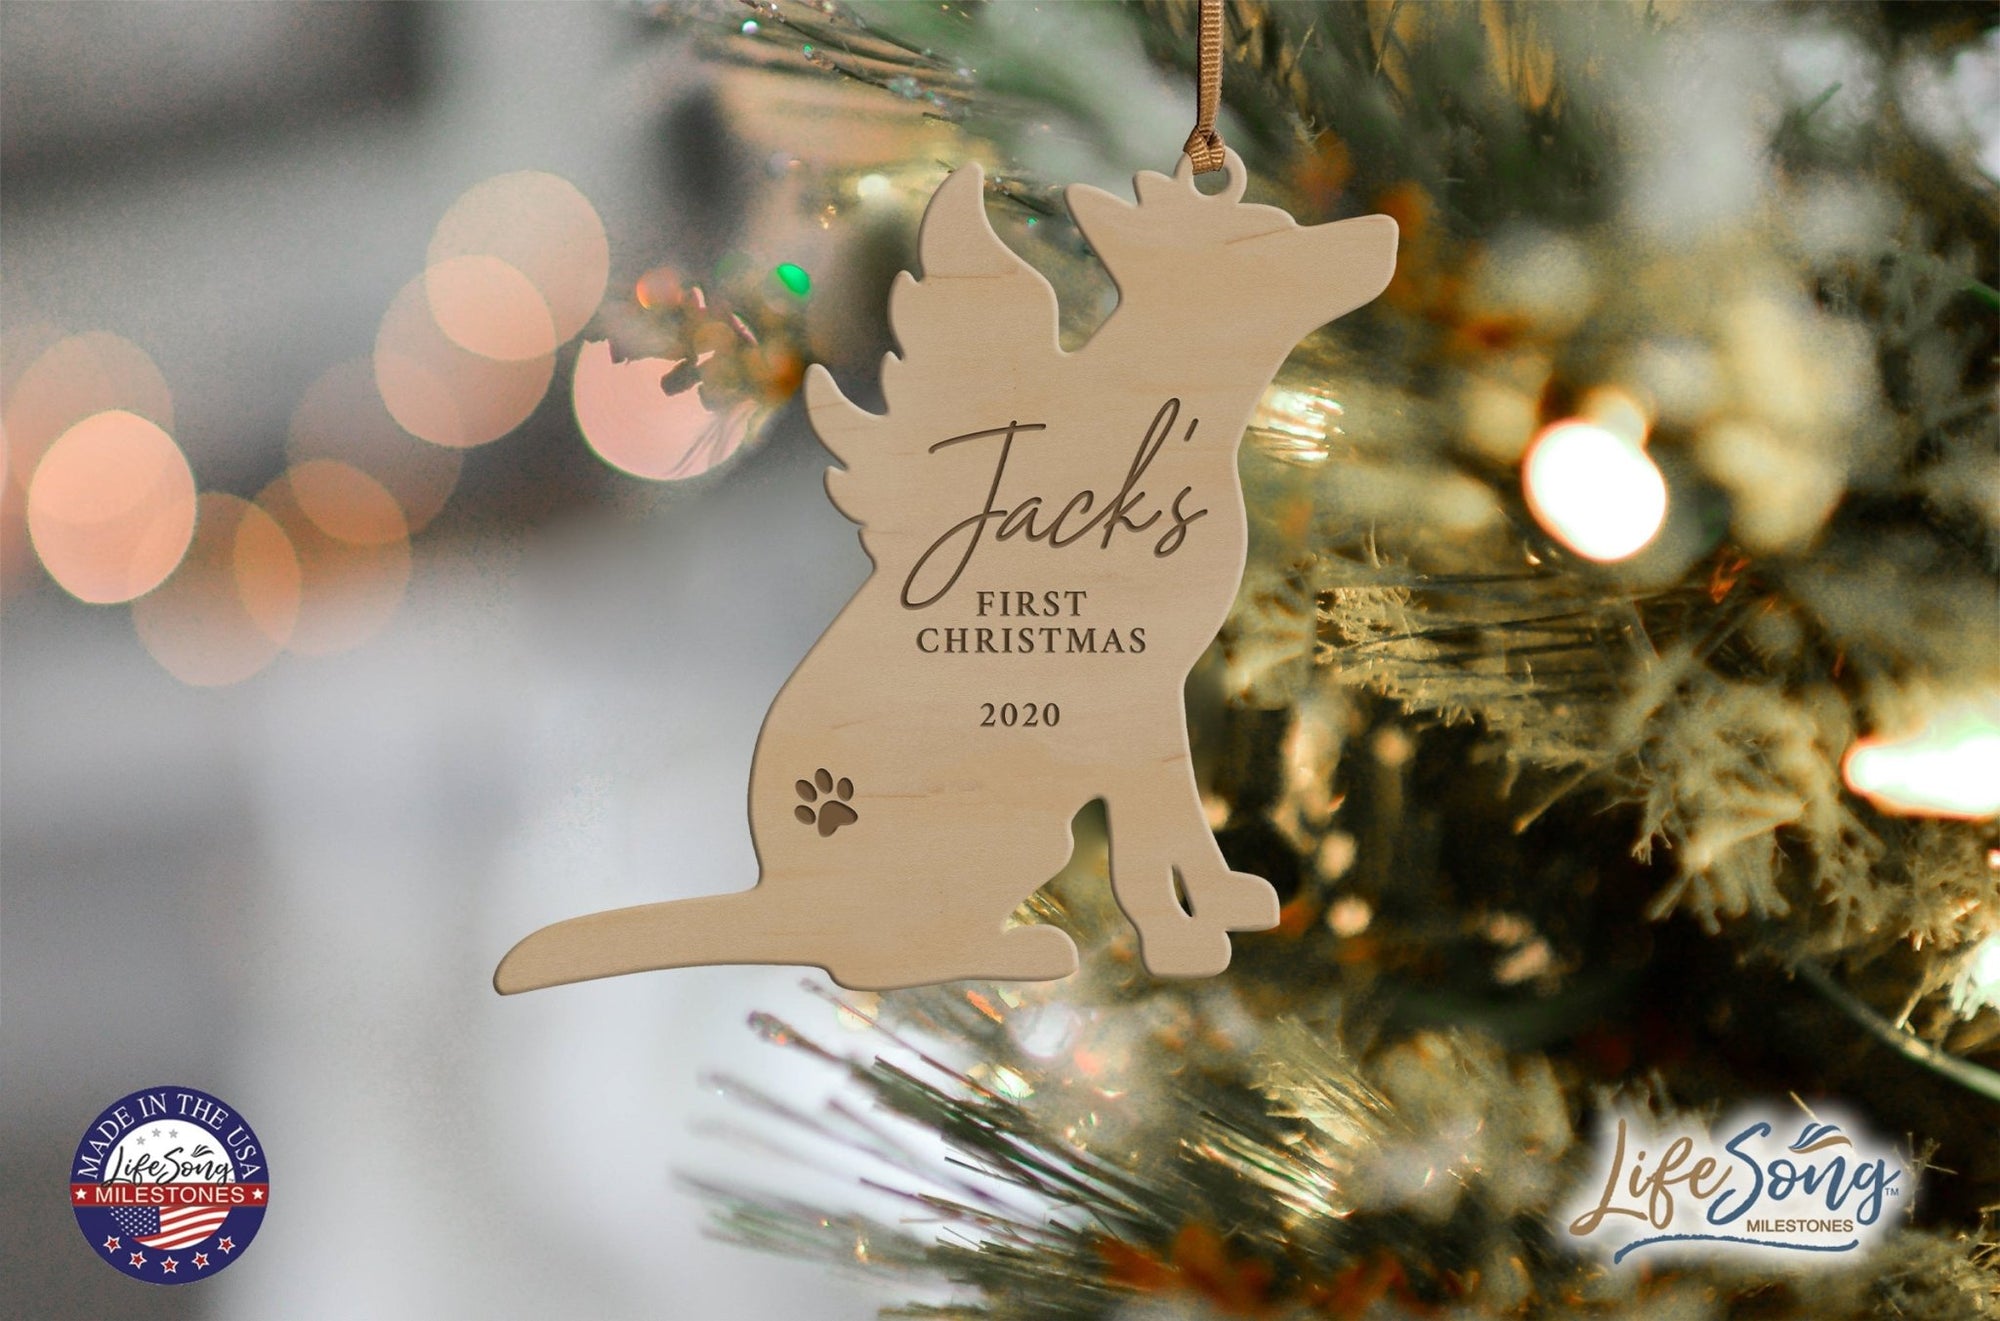 Personalized Engraved Christmas Dog Ornament 4.9375” x 5.375” x 0.125” - First Christmas (PAW) - LifeSong Milestones